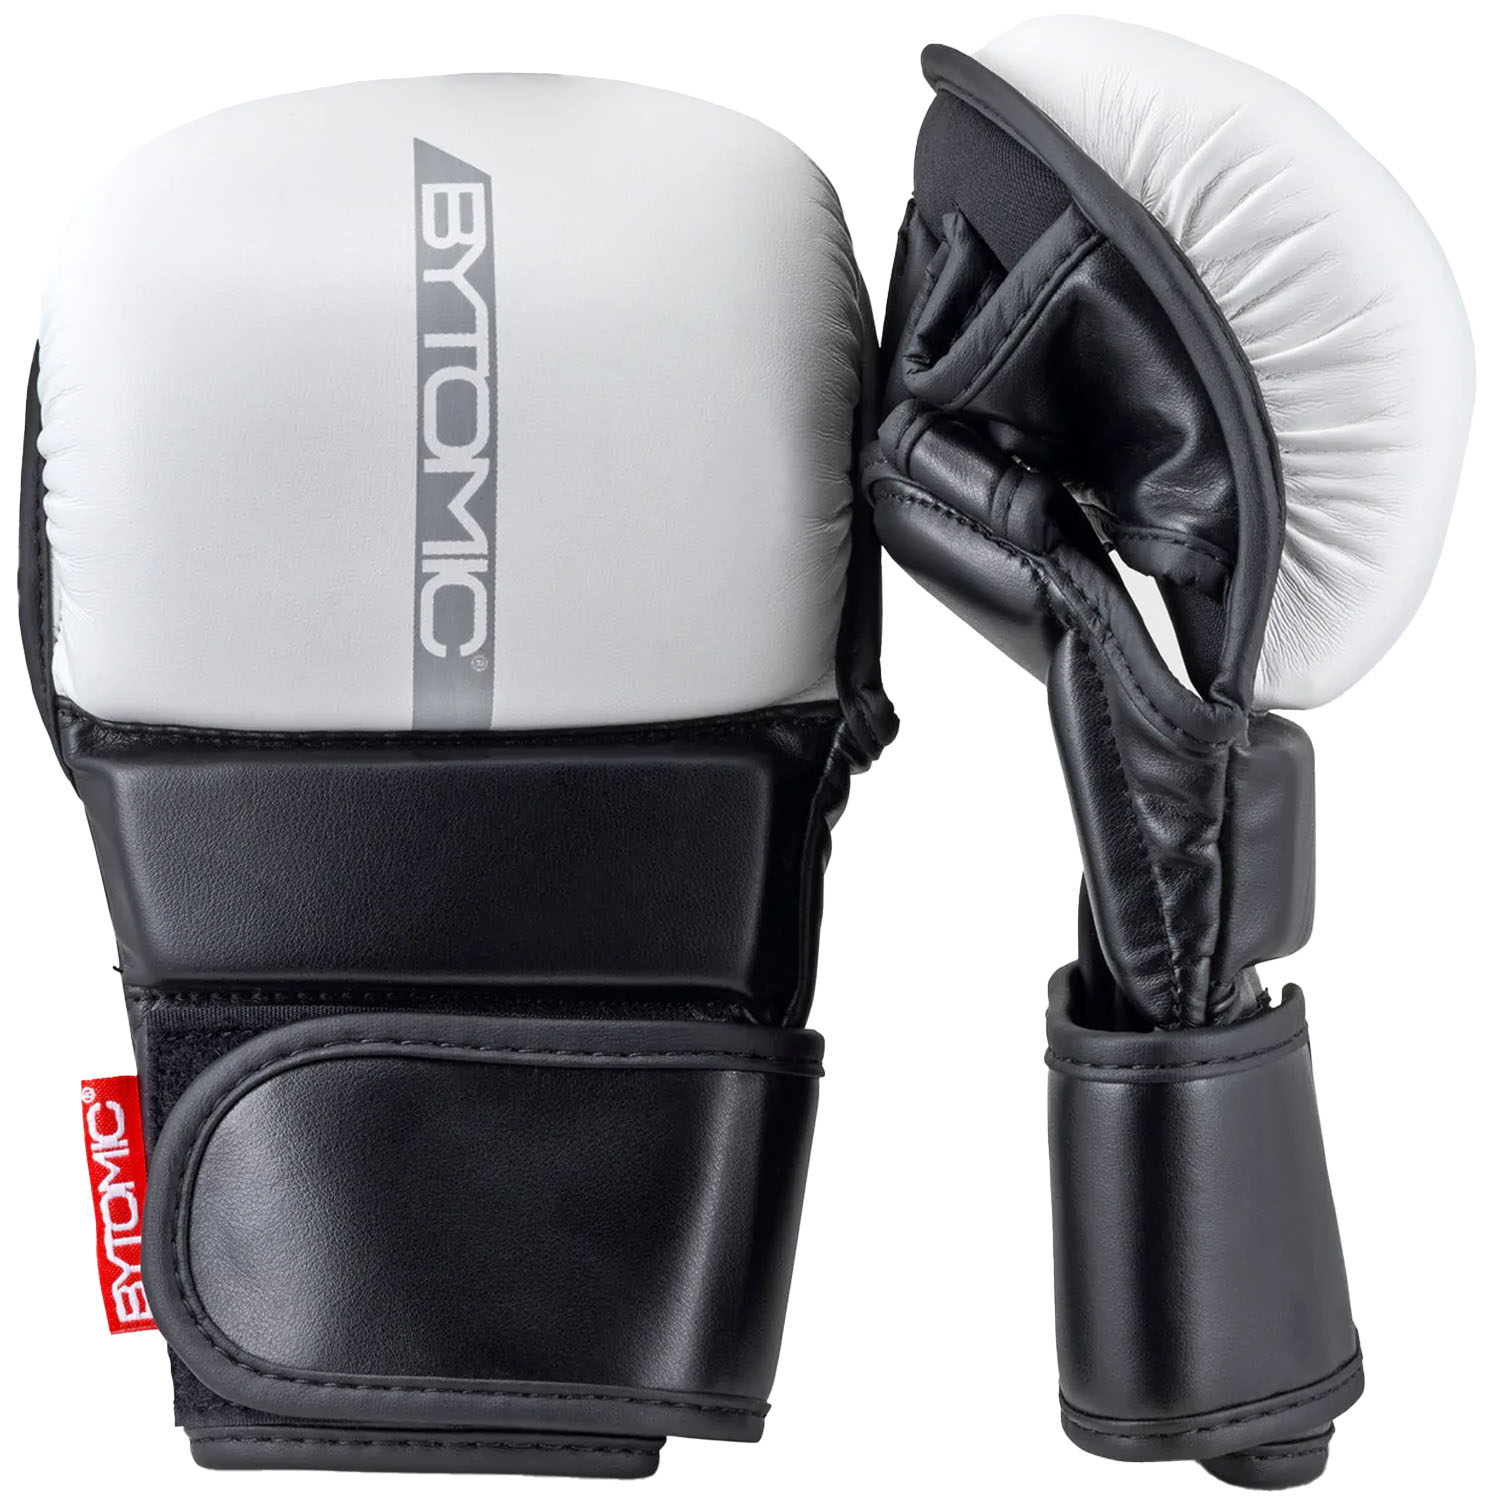 Bytomic MMA Sparring Boxing Gloves, red Label, white, S/M